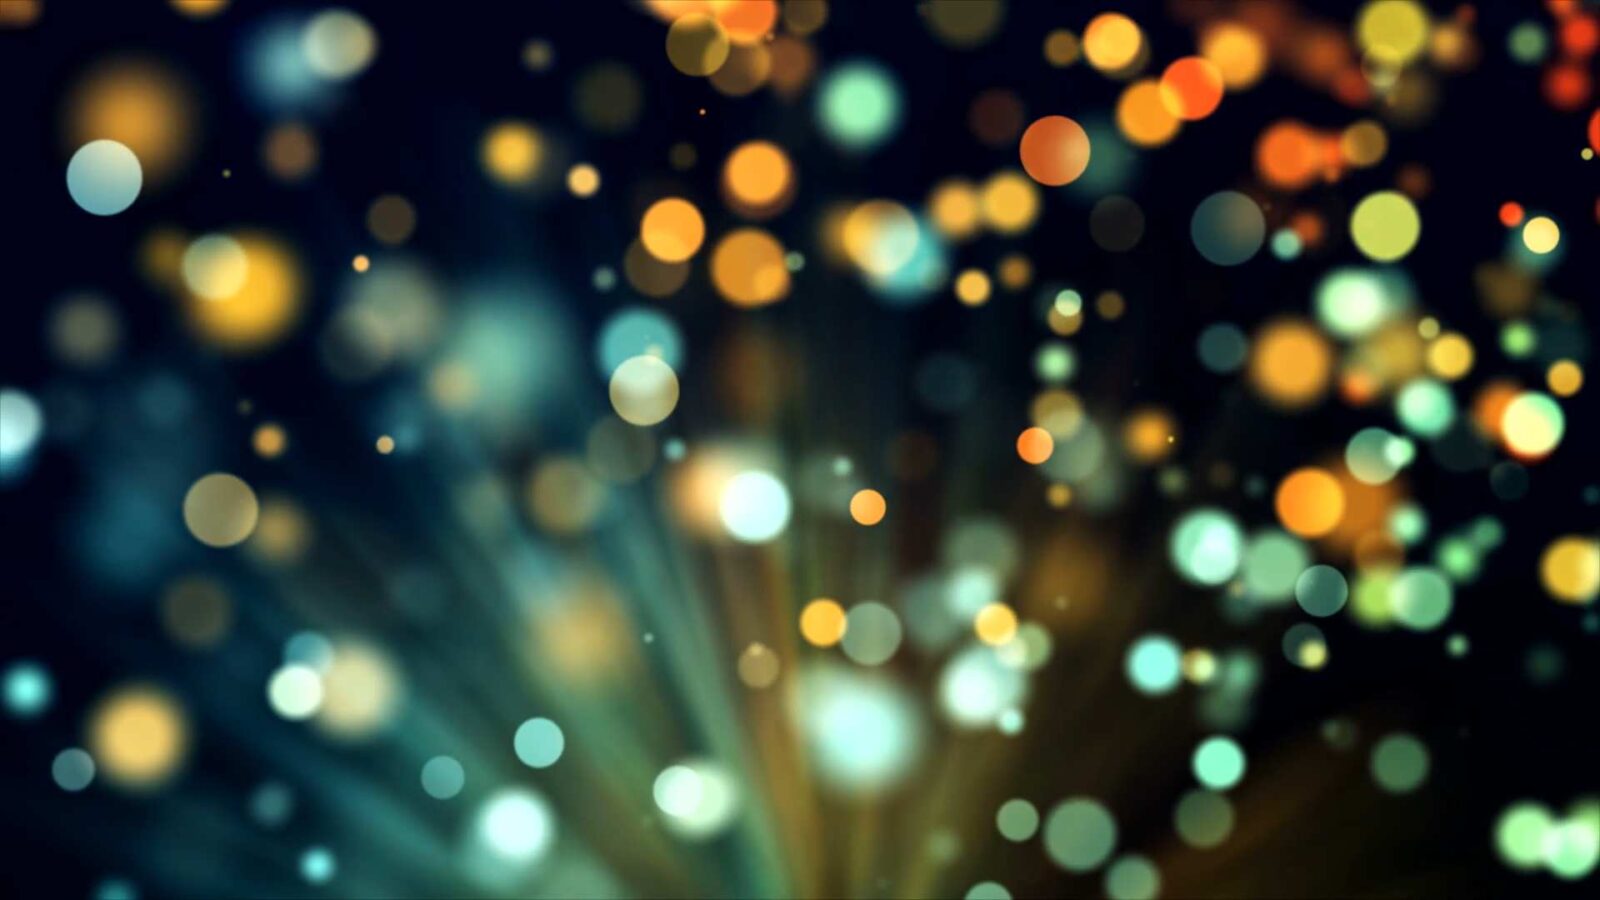 LiveWallpapers4Free.com | Blurry Particles Of Light In Chaotic Motion - Free Live Wallpaper